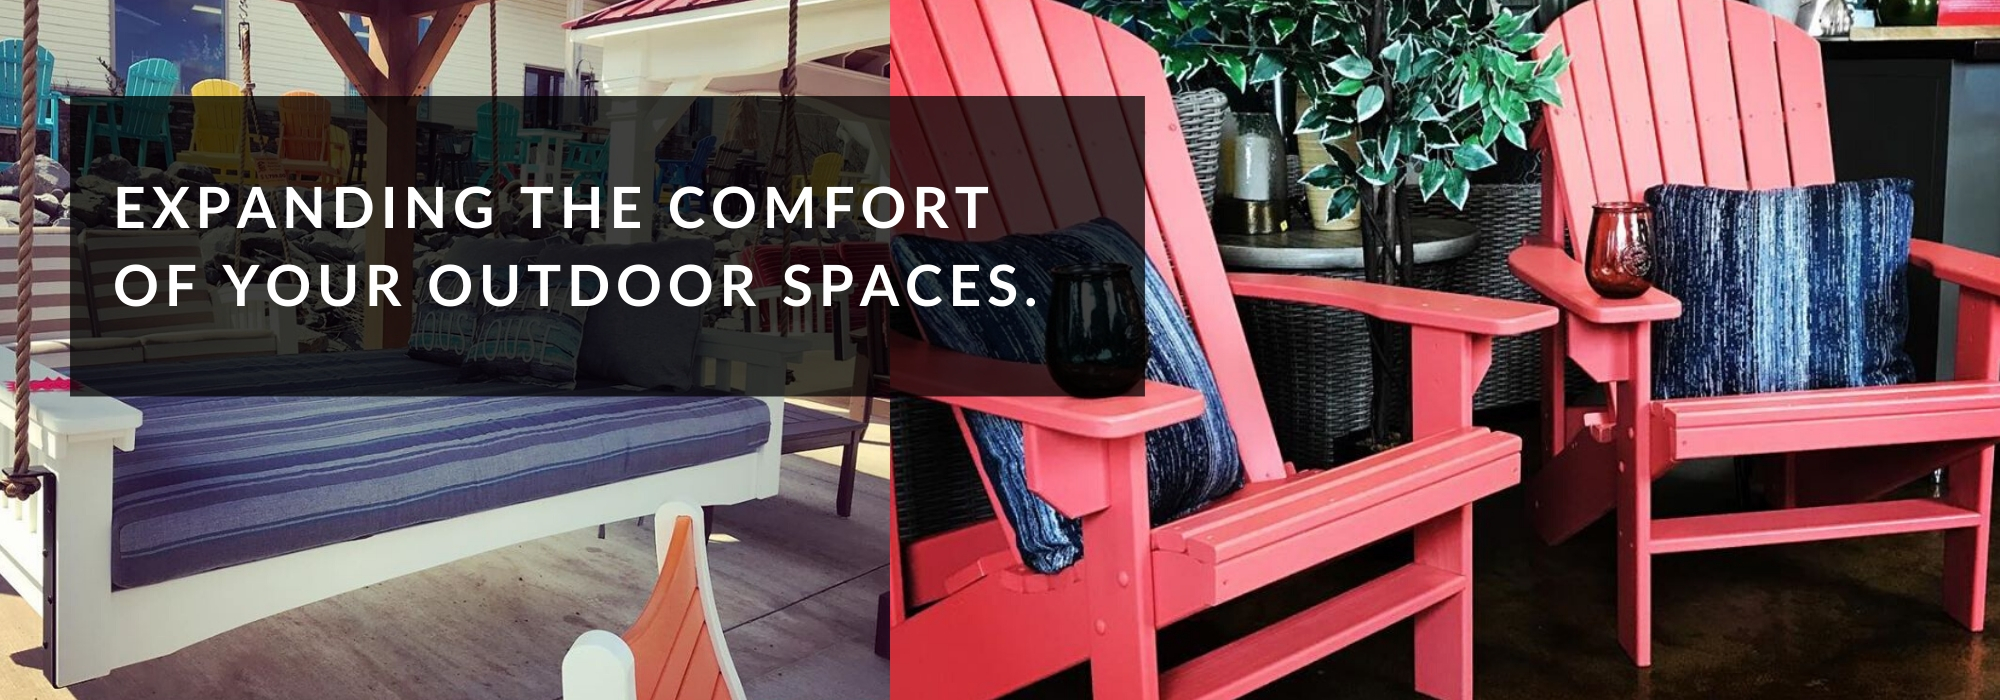 expanding the comfort of your outdoor spaces.